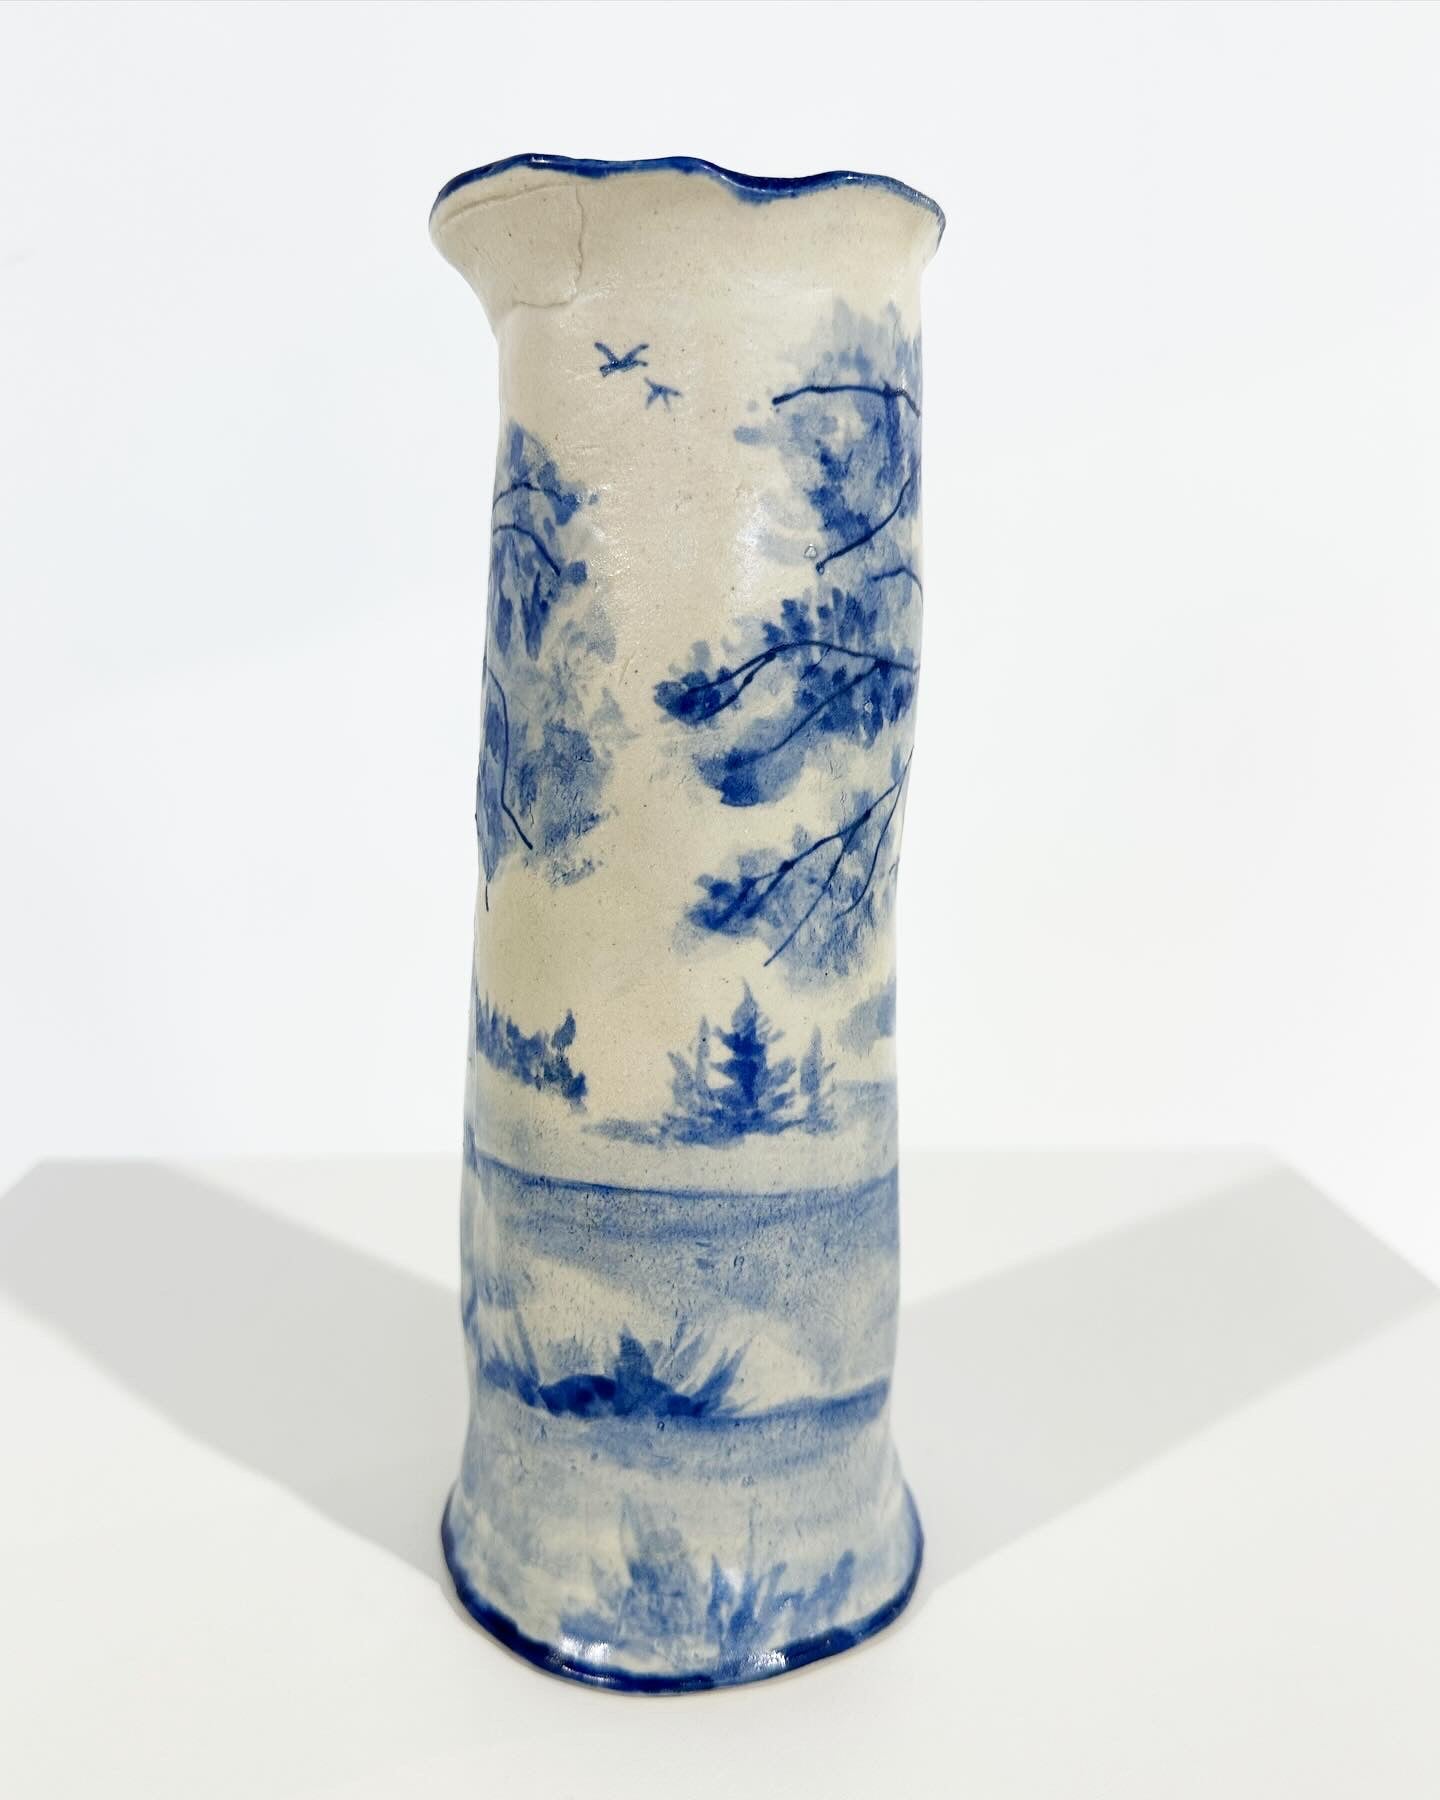 The Countryside Vase